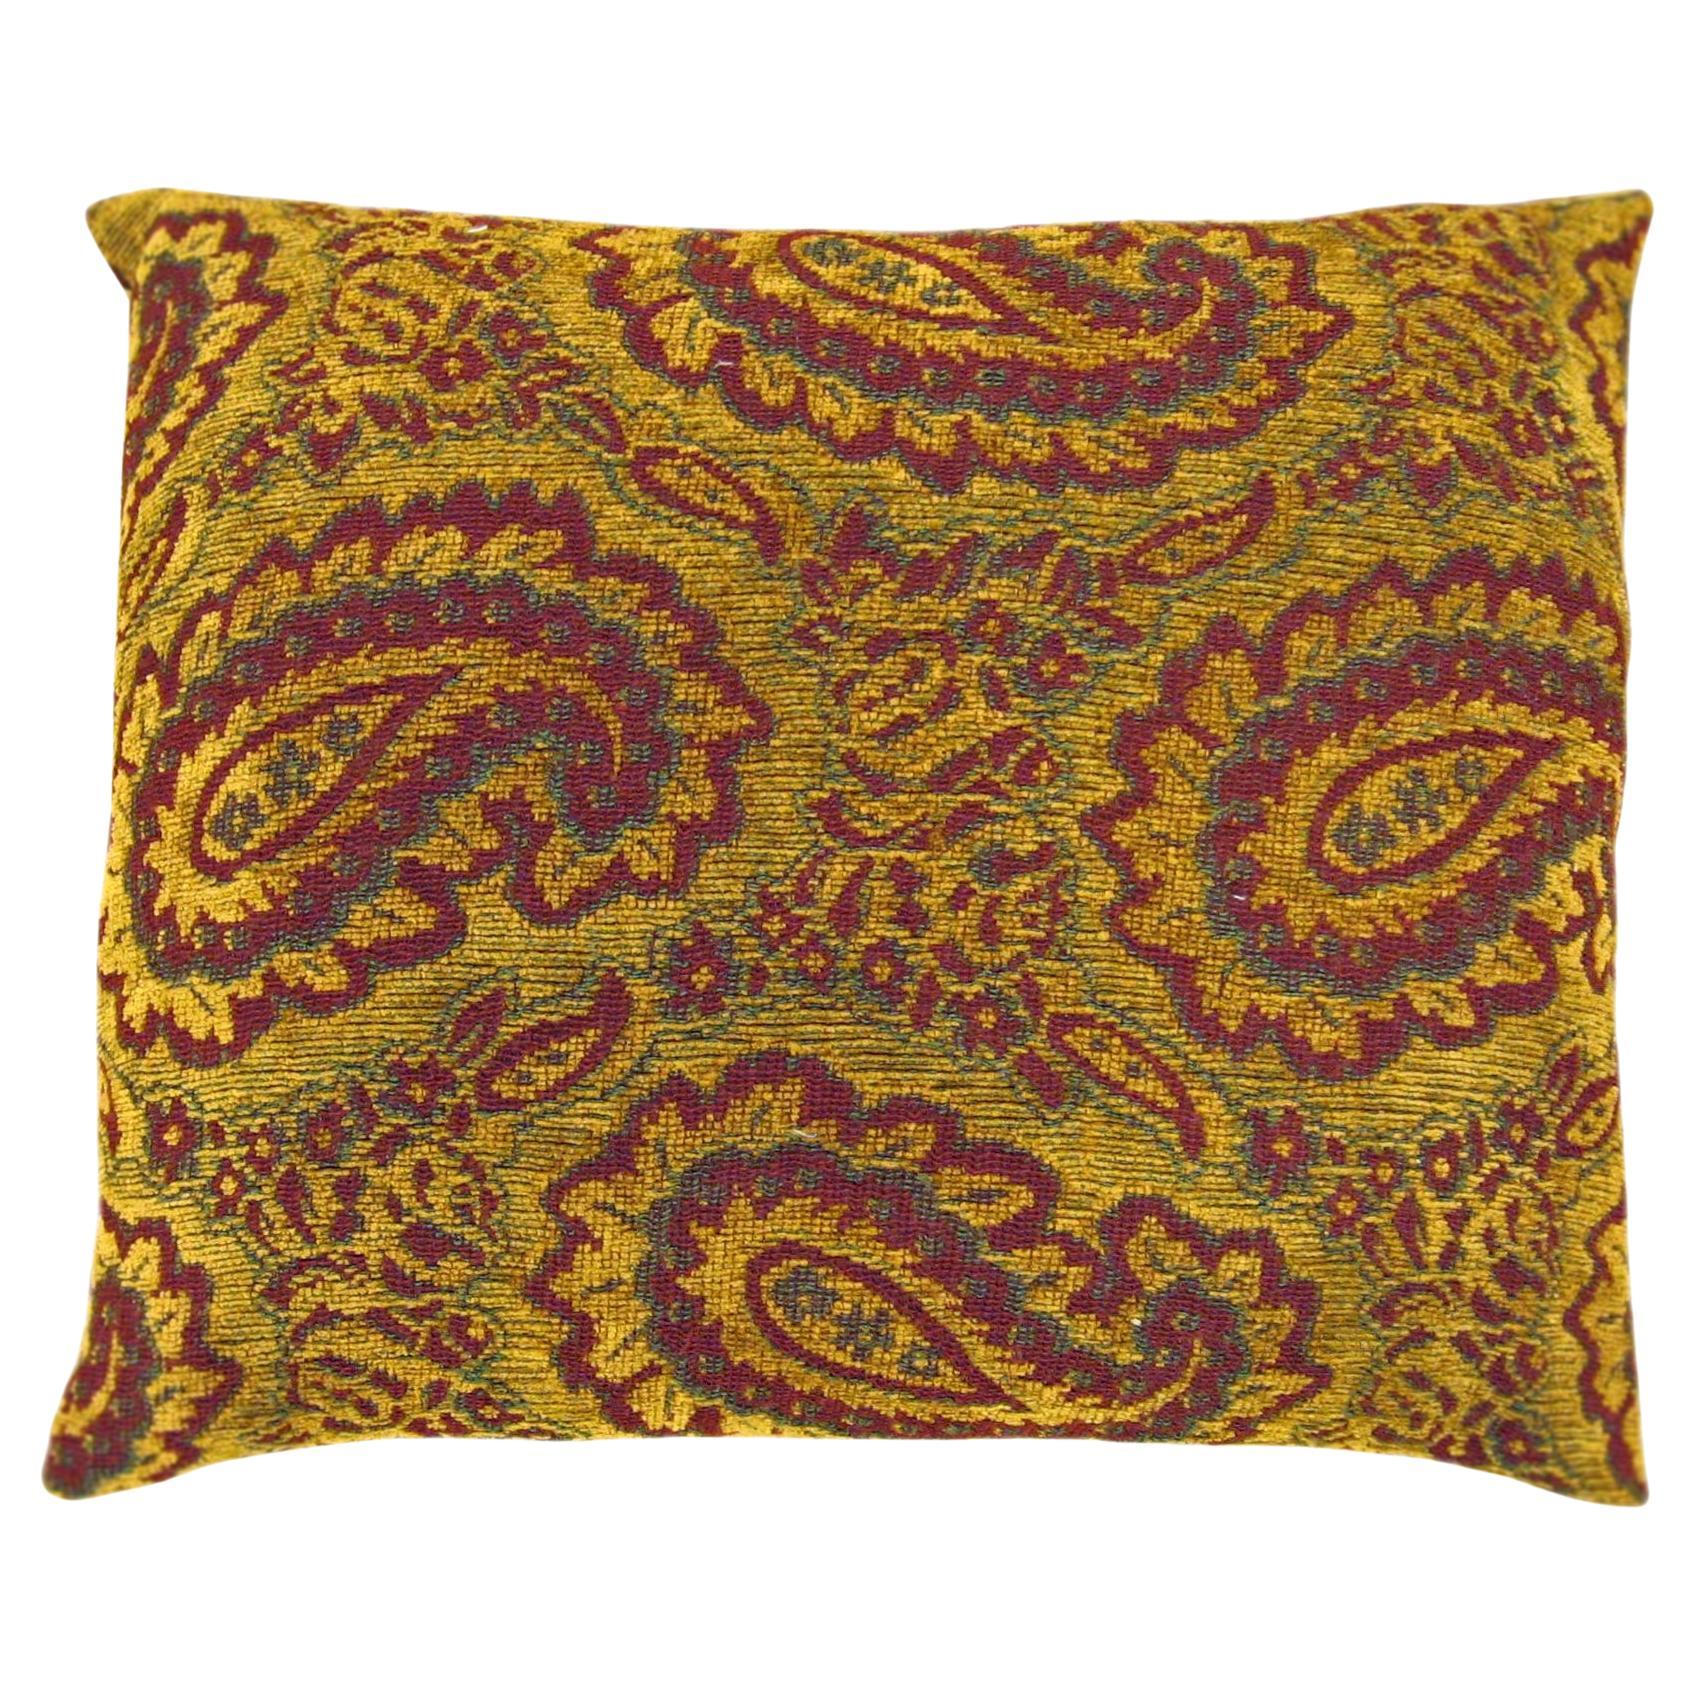 Vintage Tapestry Pillows with Large Paisley Designs For Sale